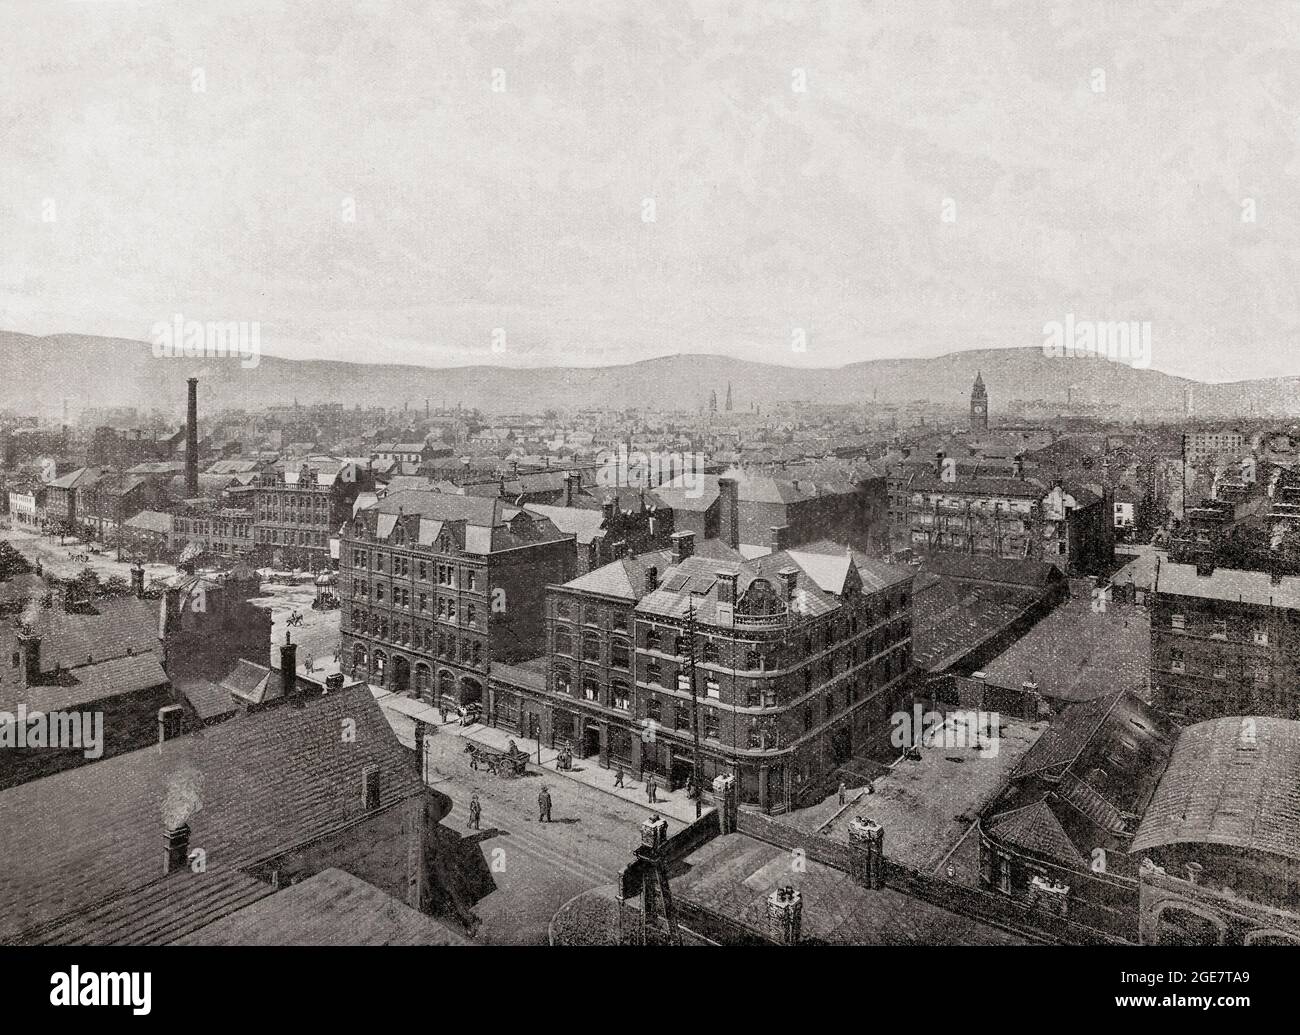 The second of three late 19th century panoramic views of Belfast, the capital and largest city of Northern Ireland, standing on the banks of the River Lagan on the east coast.  Belfast was a major port playing an important role in the Industrial Revolution in Ireland, earning it the nickname 'Linenopolis' as a major centre of Irish linen production, tobacco-processing and rope-making. Shipbuilding was also a key industry; the Harland and Wolff shipyard, which built the RMS Titanic, was the world's largest shipyard.  Townhall Street and Victoria street are featured in the foreground. Stock Photo